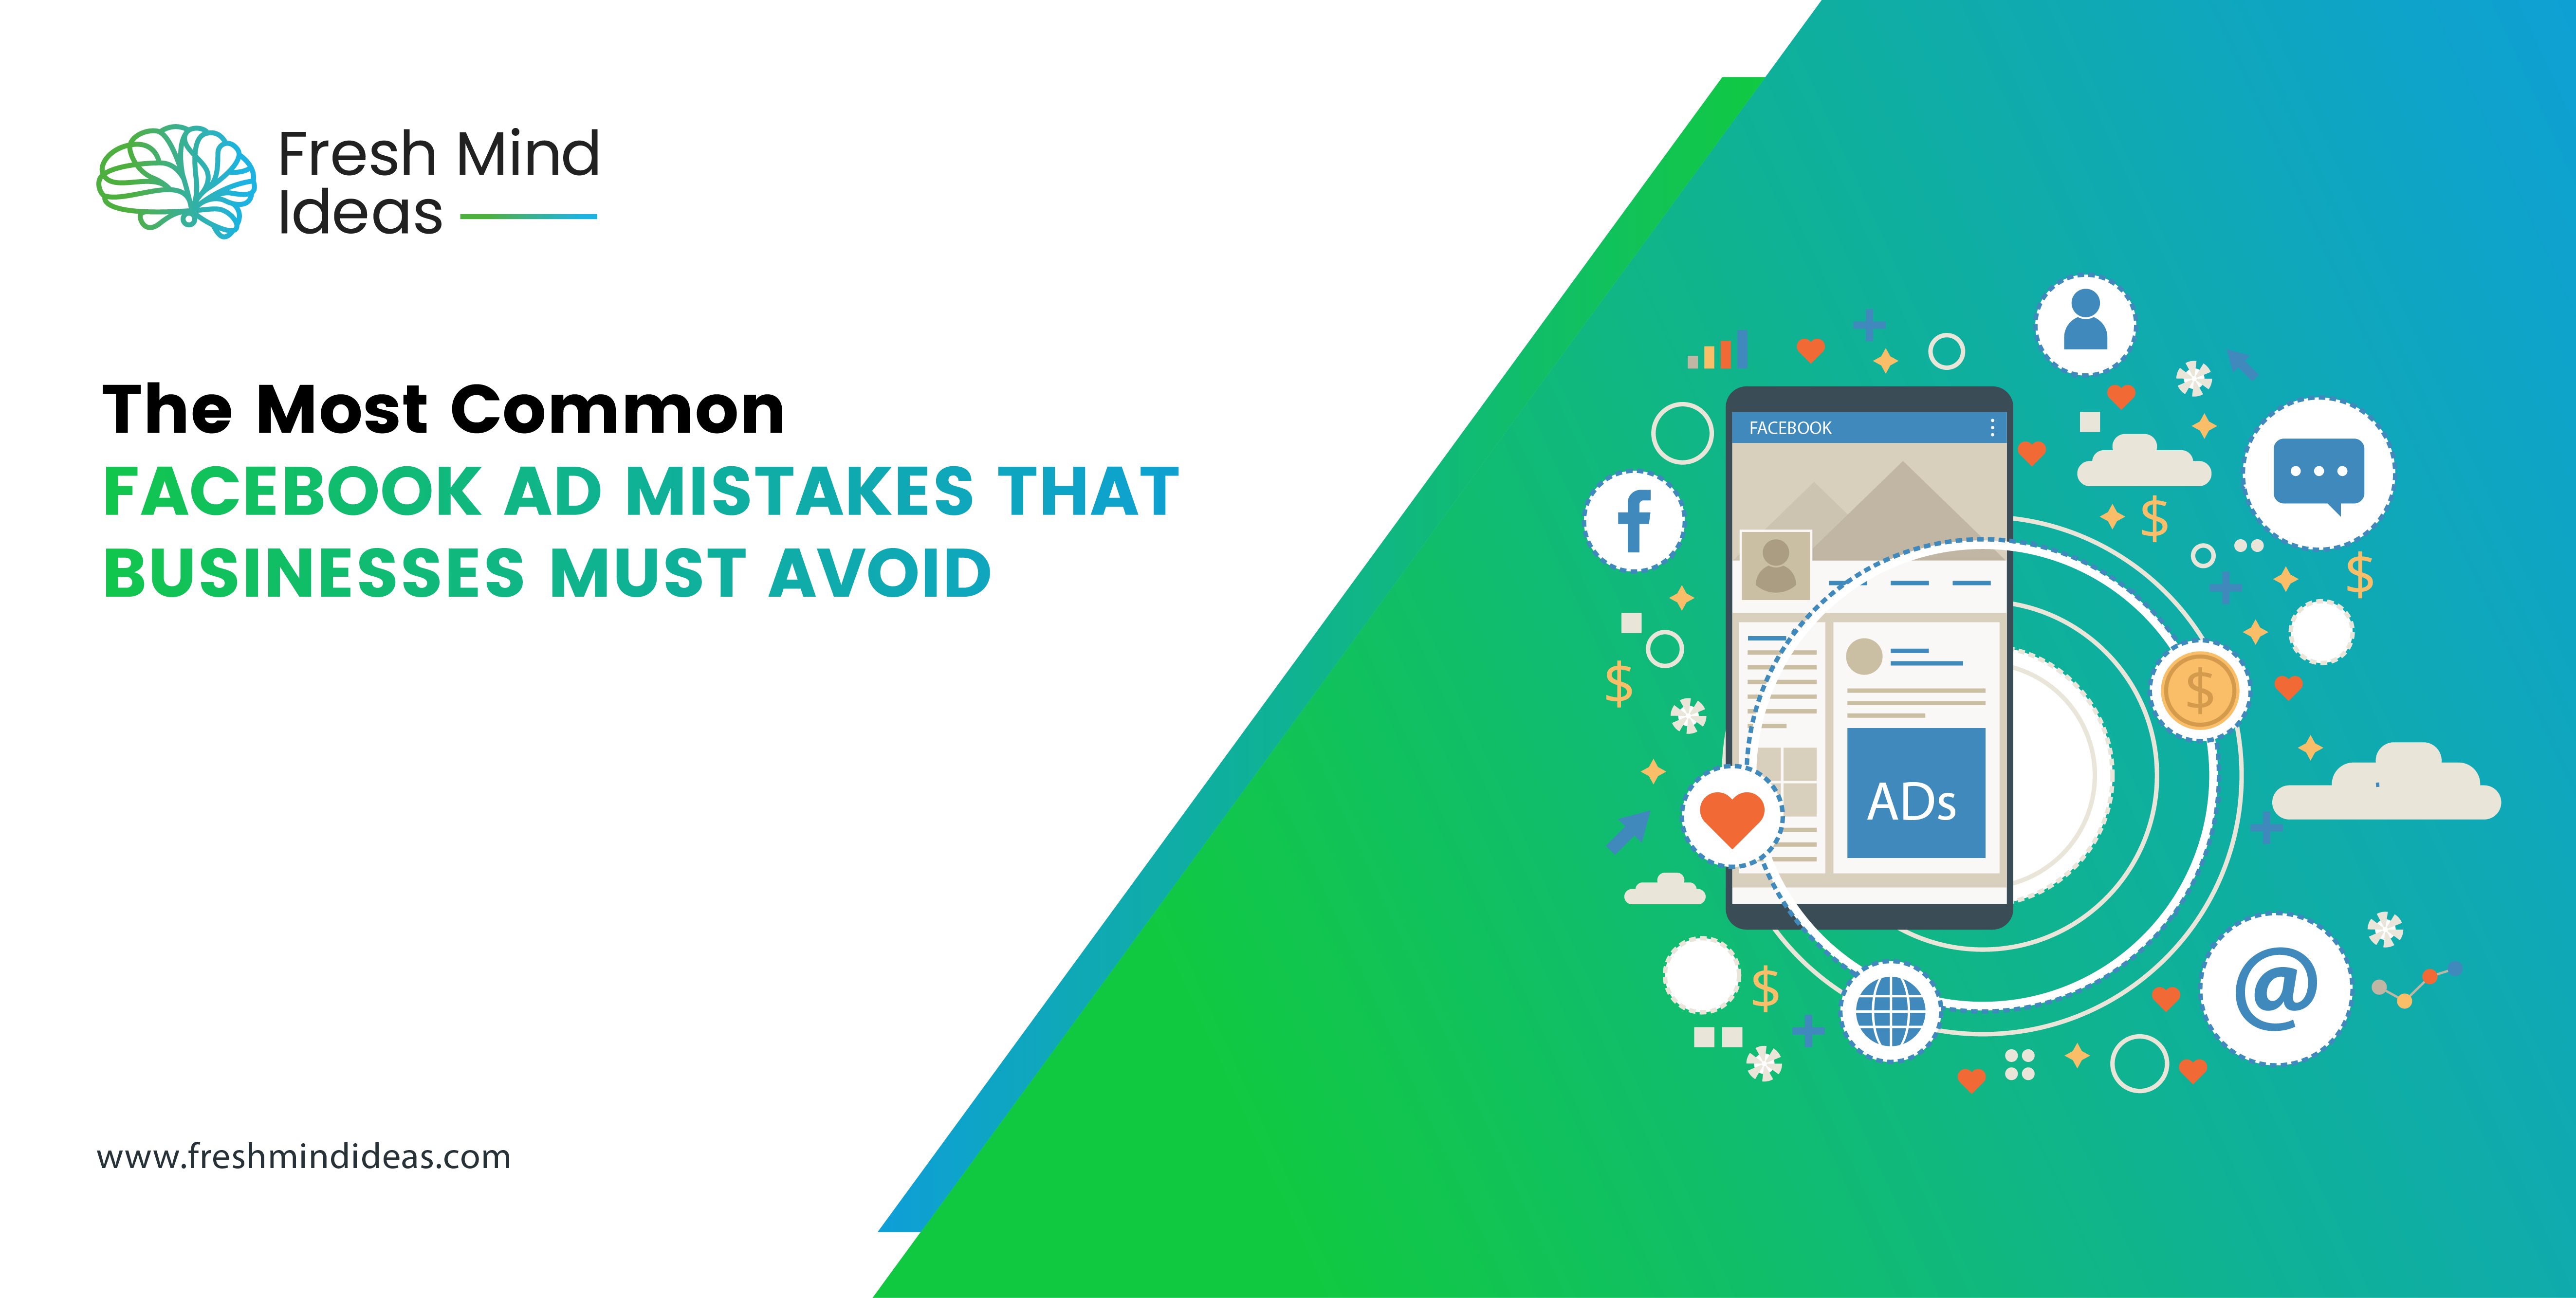 The Most Common Facebook Ad Mistakes That Businesses Must Avoid